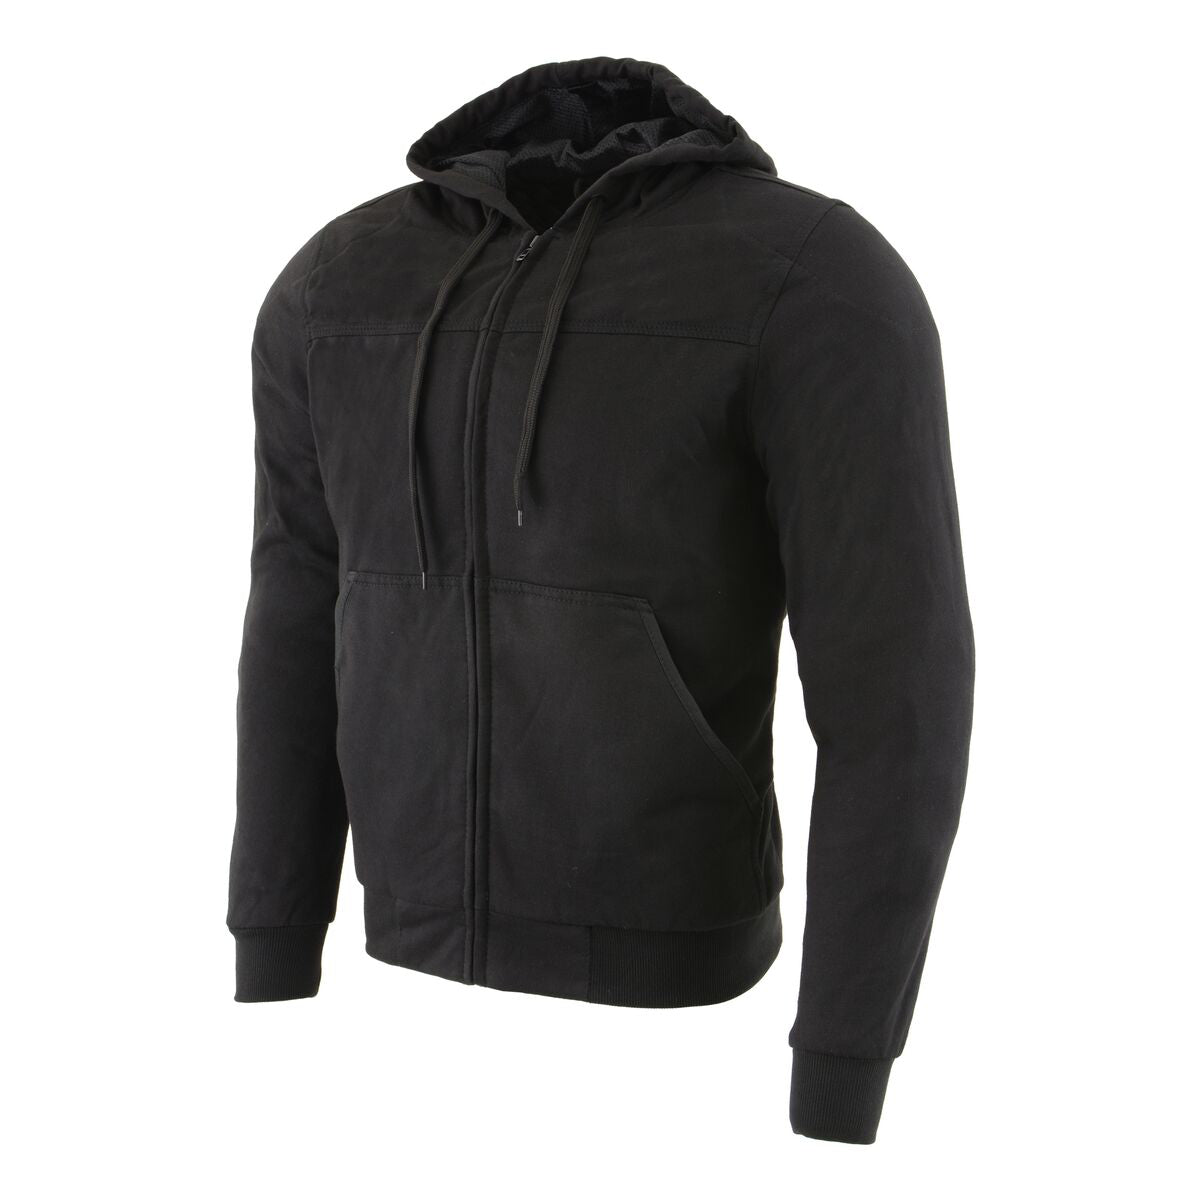 Milwaukee Leather MPM1788 Men's Black CE Approved Armored Riding Hoodie with Aramid by DuPont Fibers